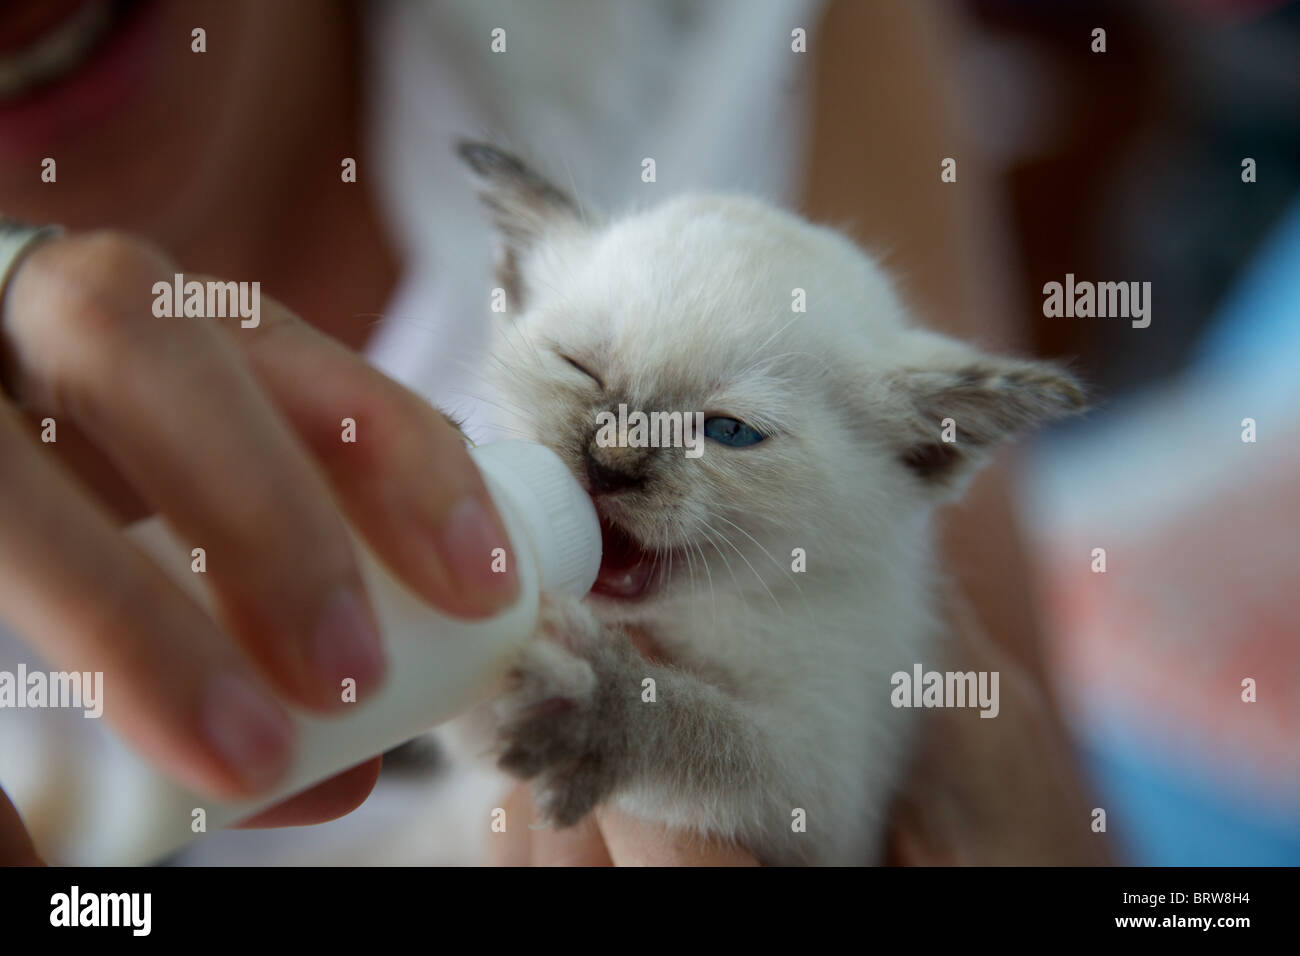 A very young blue eyed kitten abandoned by her mother being bottle fed. Stock Photo